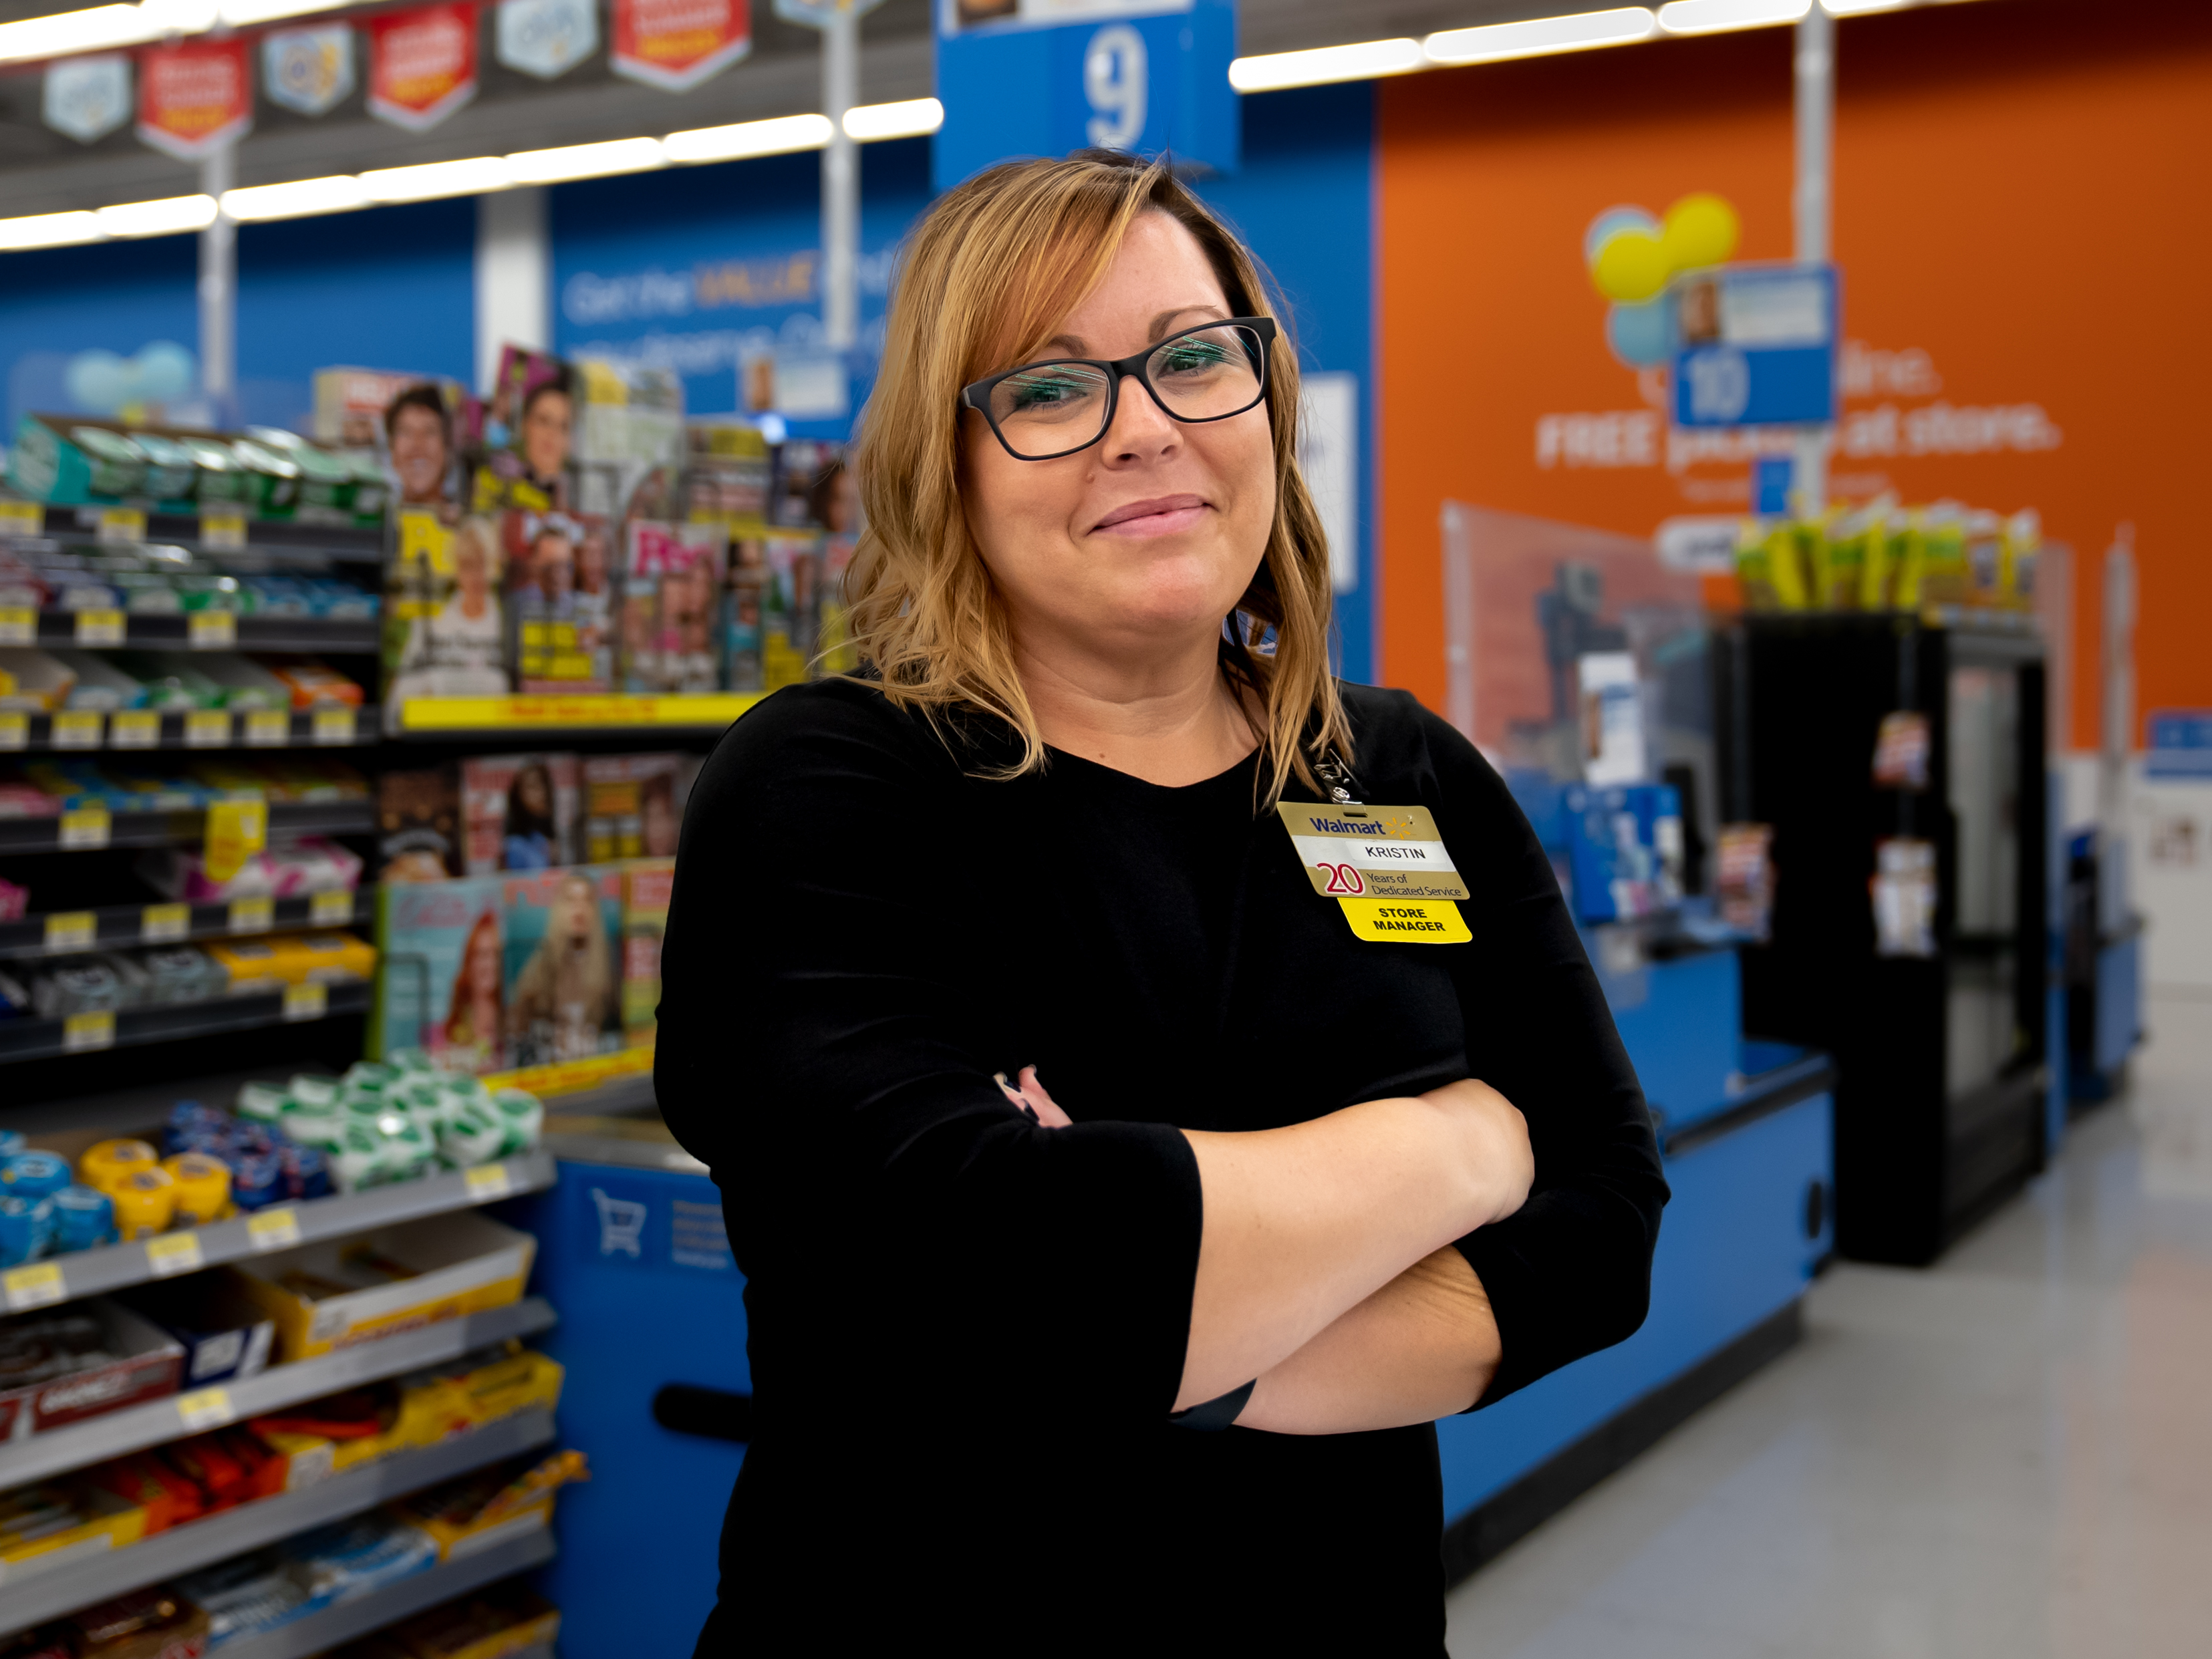 Walmart Worker Walks Out of Job, Says She's 'Never Felt So Free